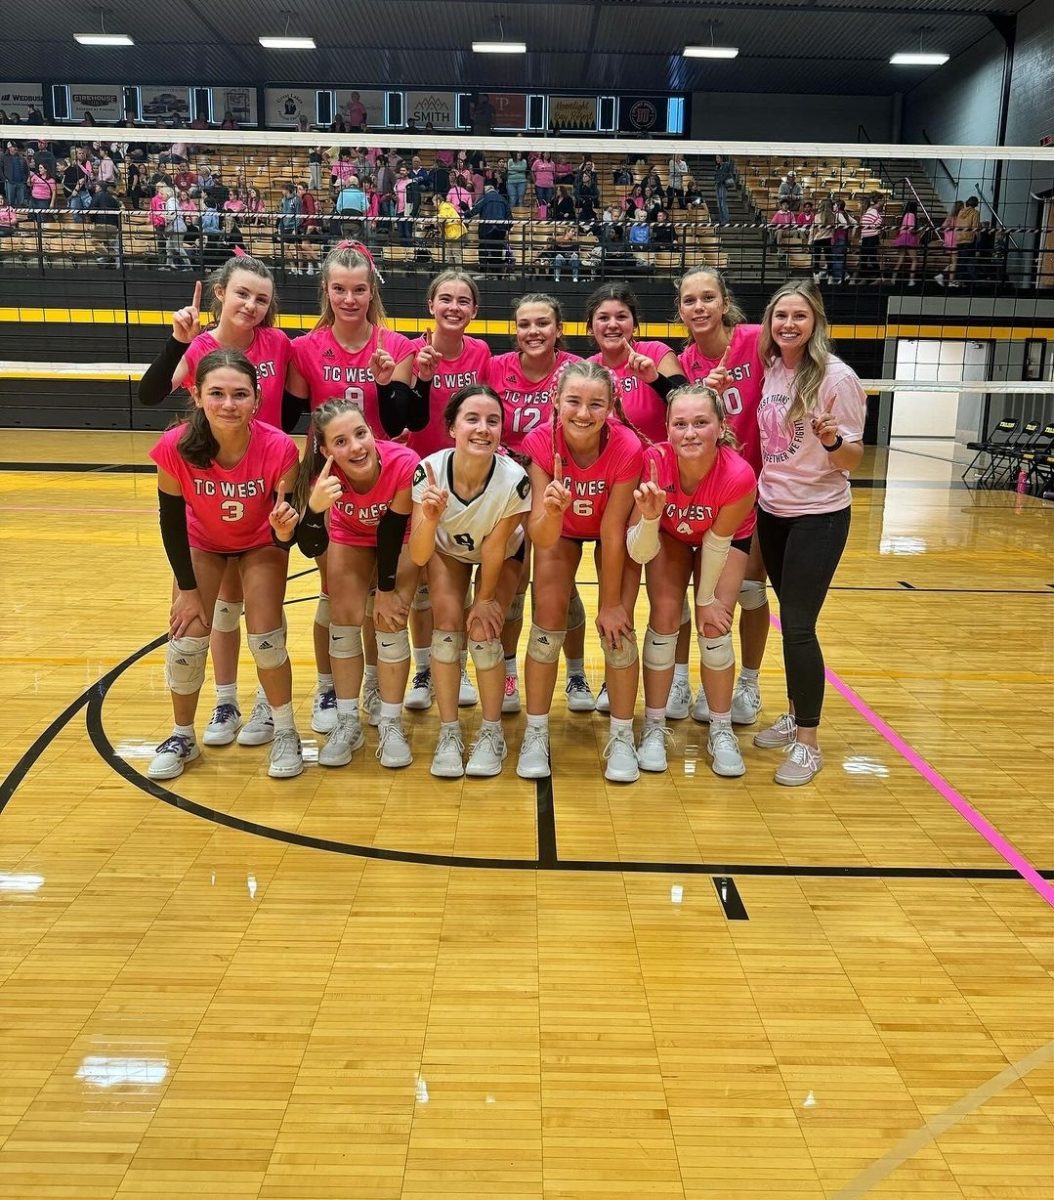 The+2023+freshman+volleyball+team+stands+together+after+the+Pink+Game.+Photo+Credit%3A+Emily+Baumann